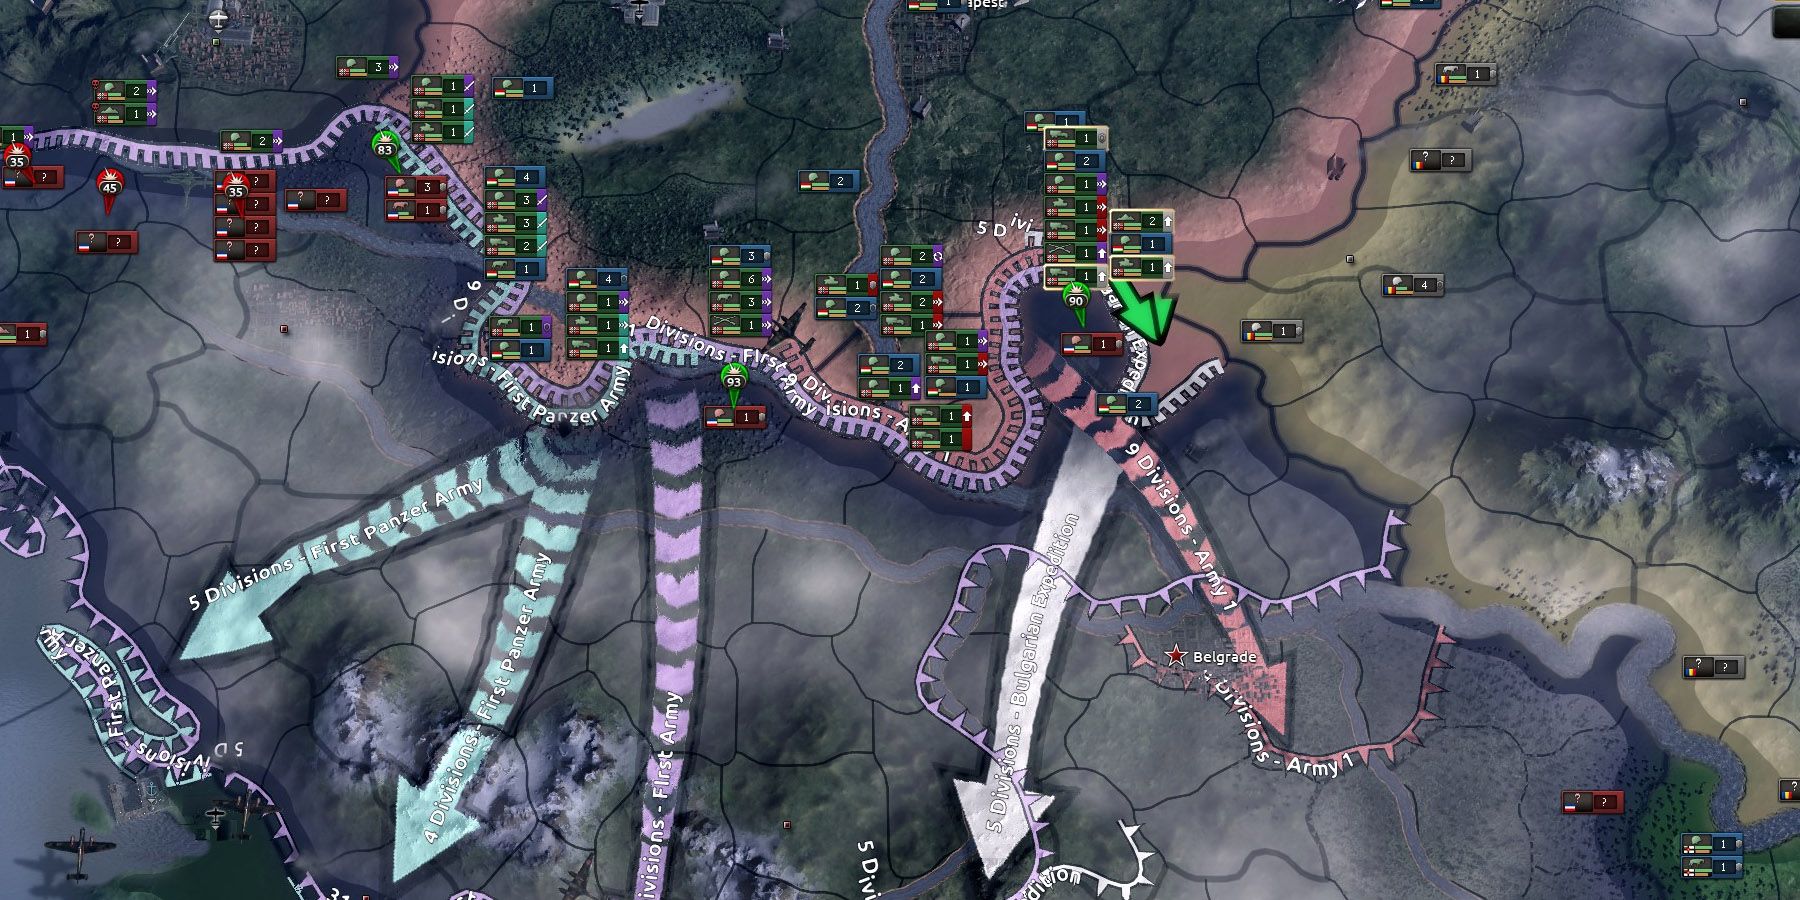 Hearts of Iron 4 gameplay showing war